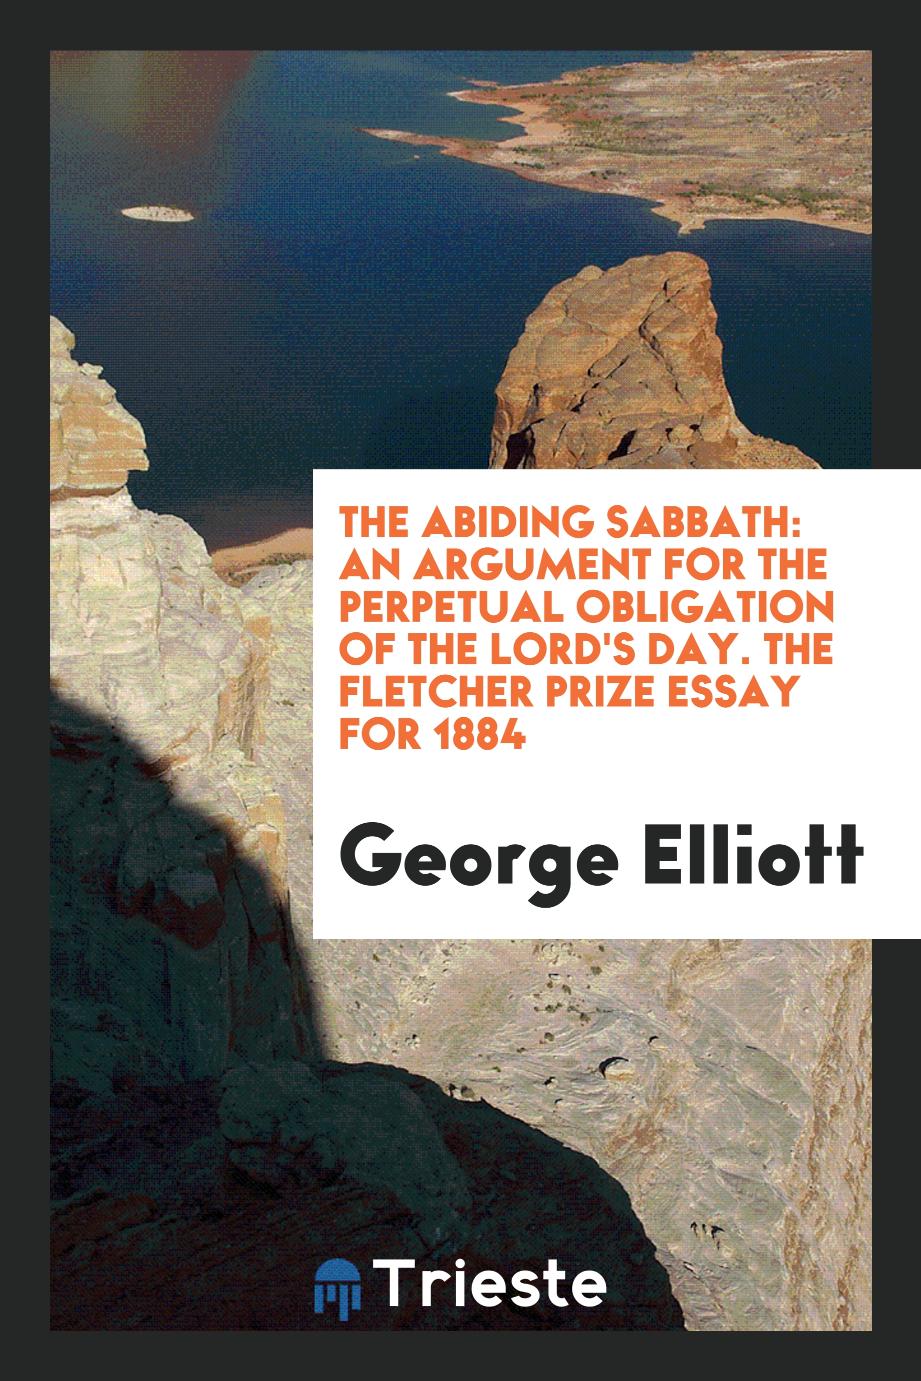 The abiding Sabbath: an argument for the perpetual obligation of the Lord's day. The fletcher prize essay for 1884